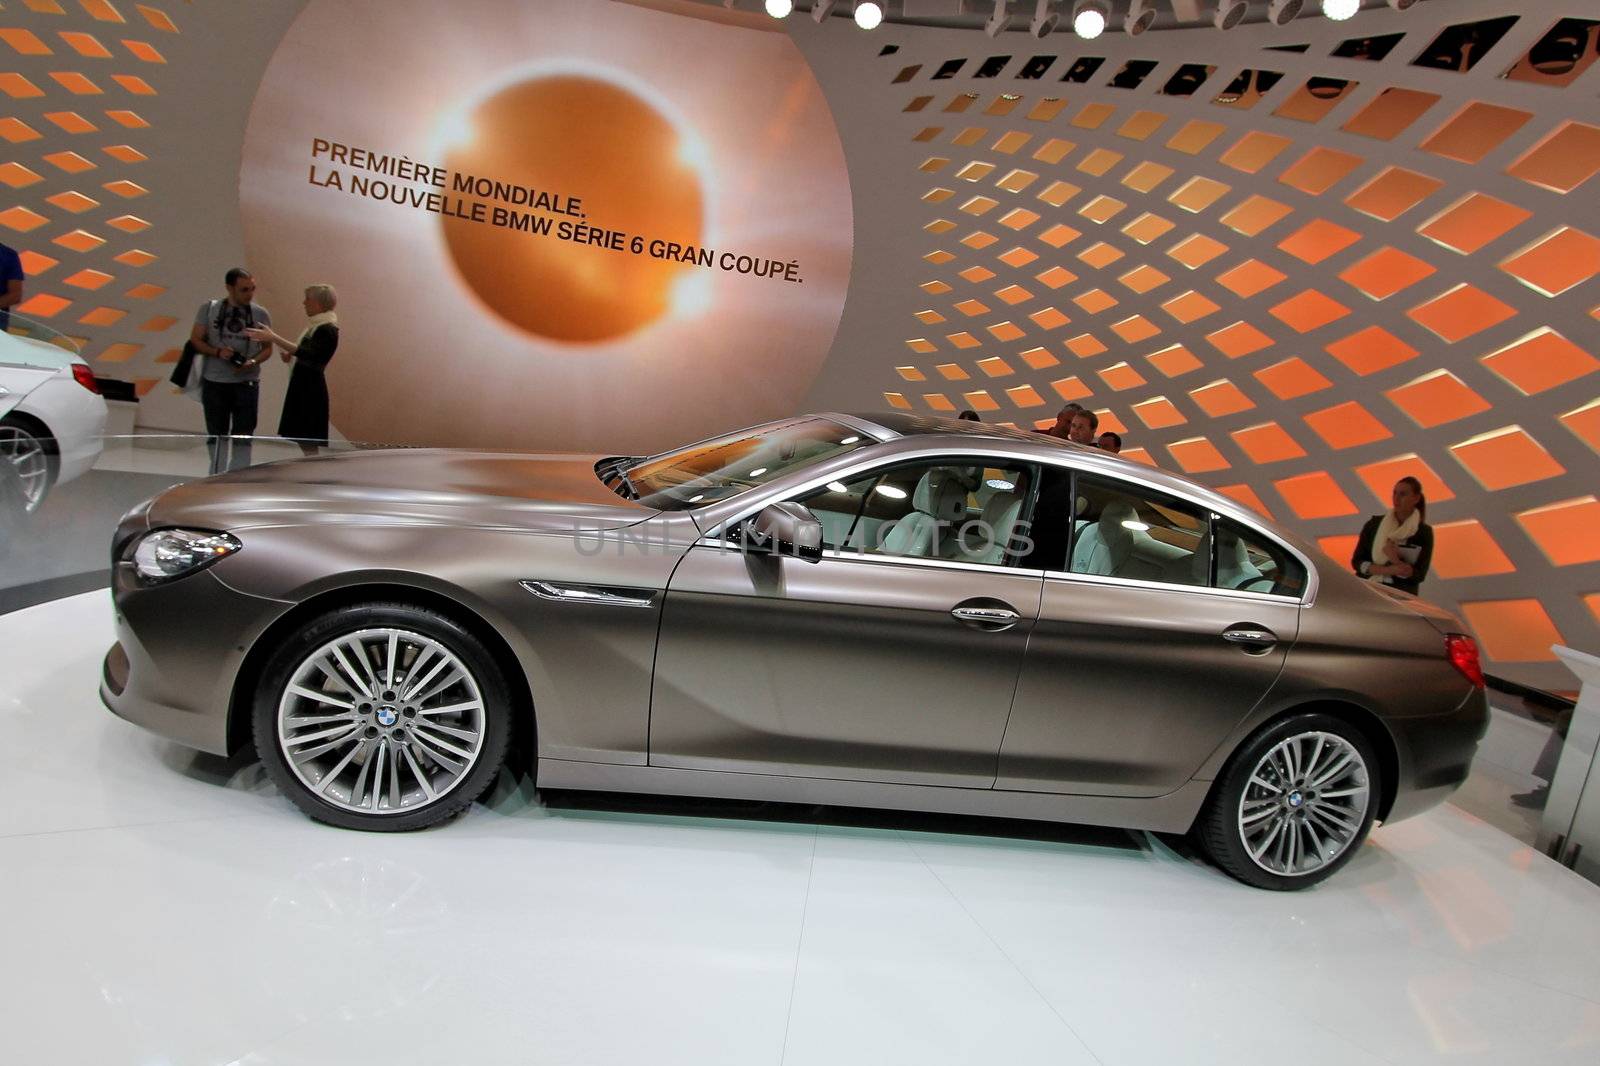 GENEVA - MARCH 16 : Brown BMW Gran Coupe 6 series on display at the 82st International Motor Show Palexpo -Geneva on March 16; 2012 in Geneva, Switzerland.